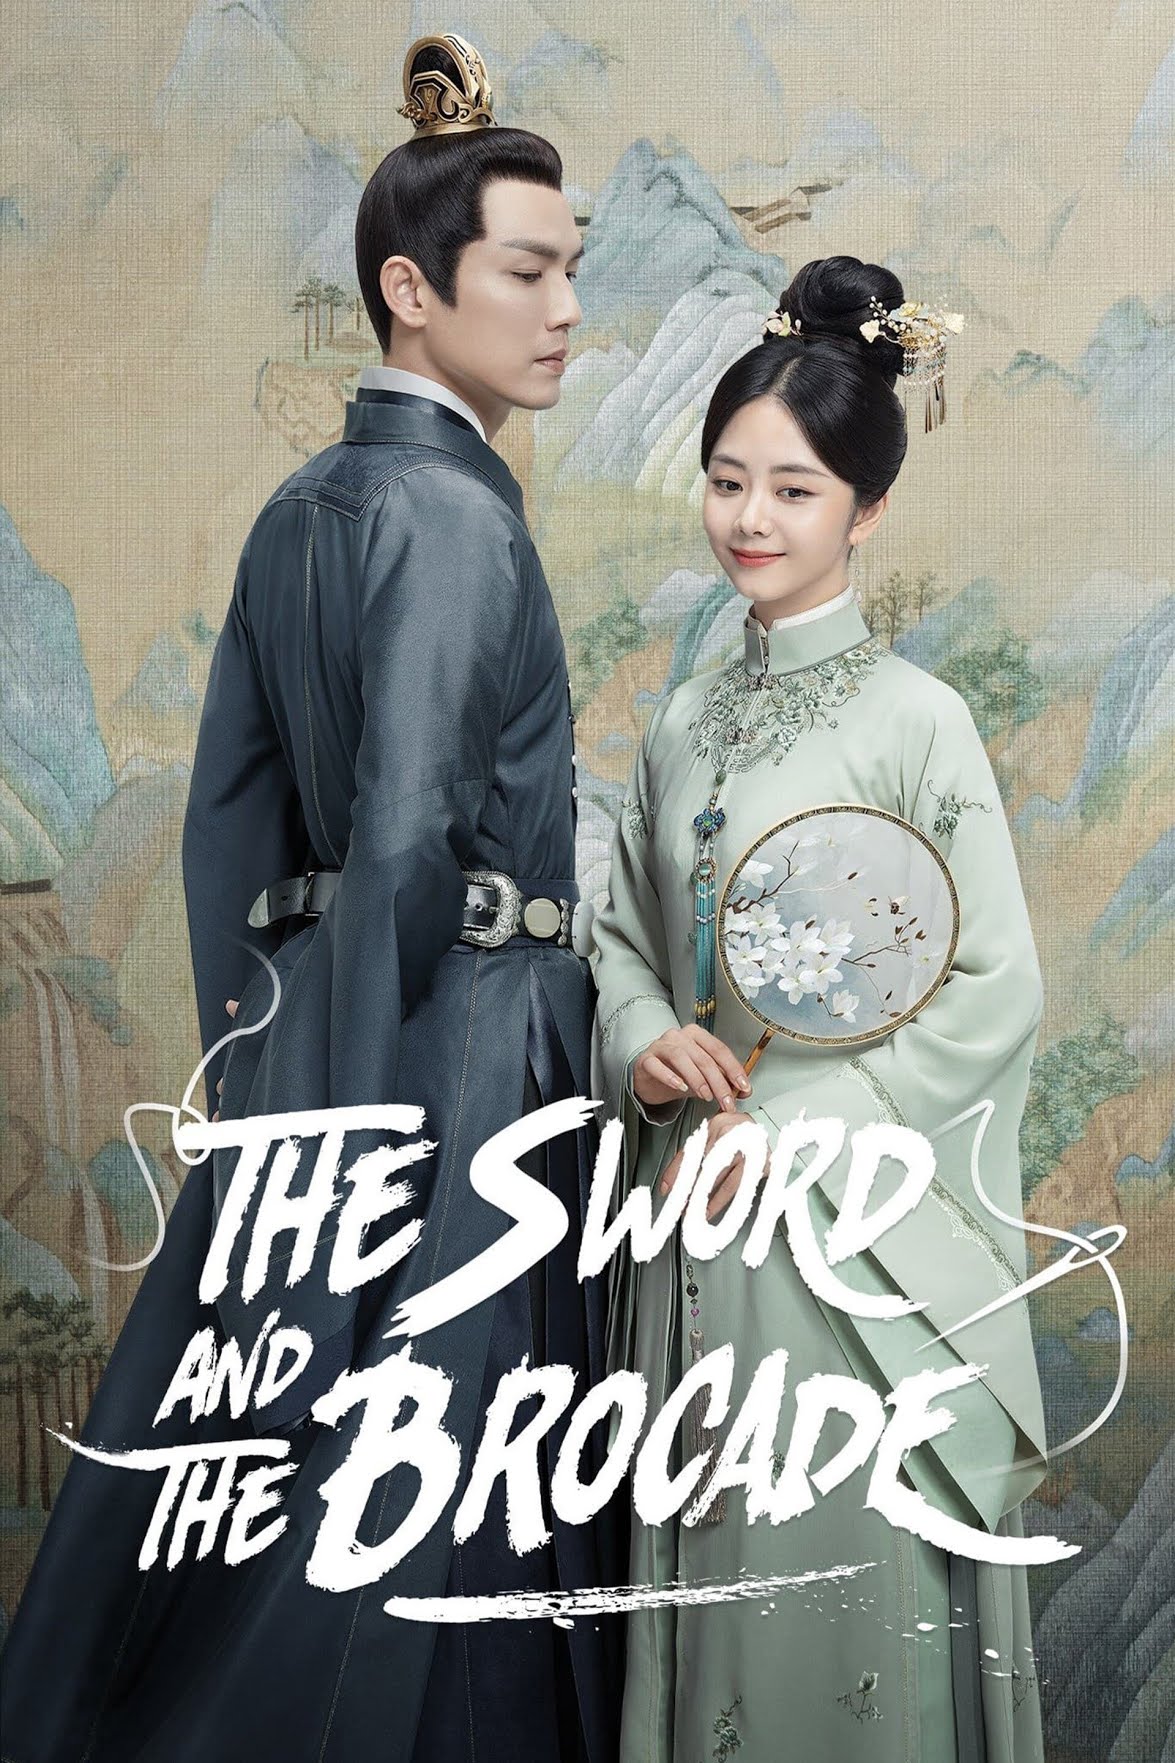 The Sword and The Brocade